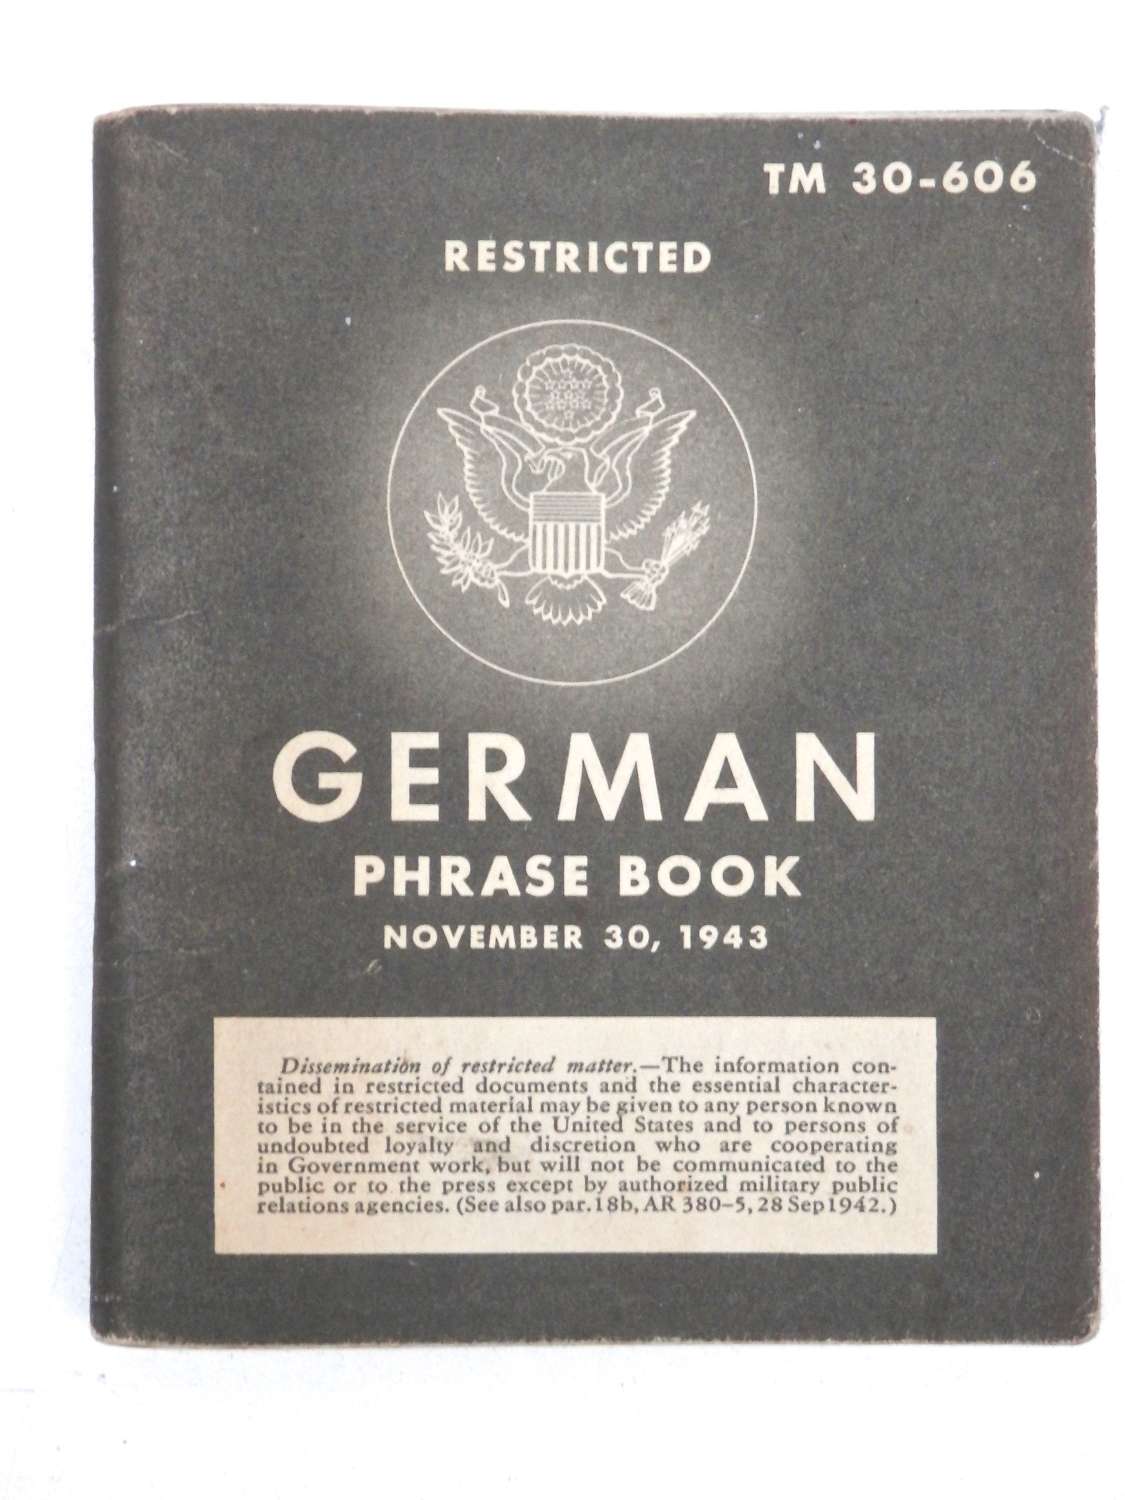 German phrase book 1943 dated